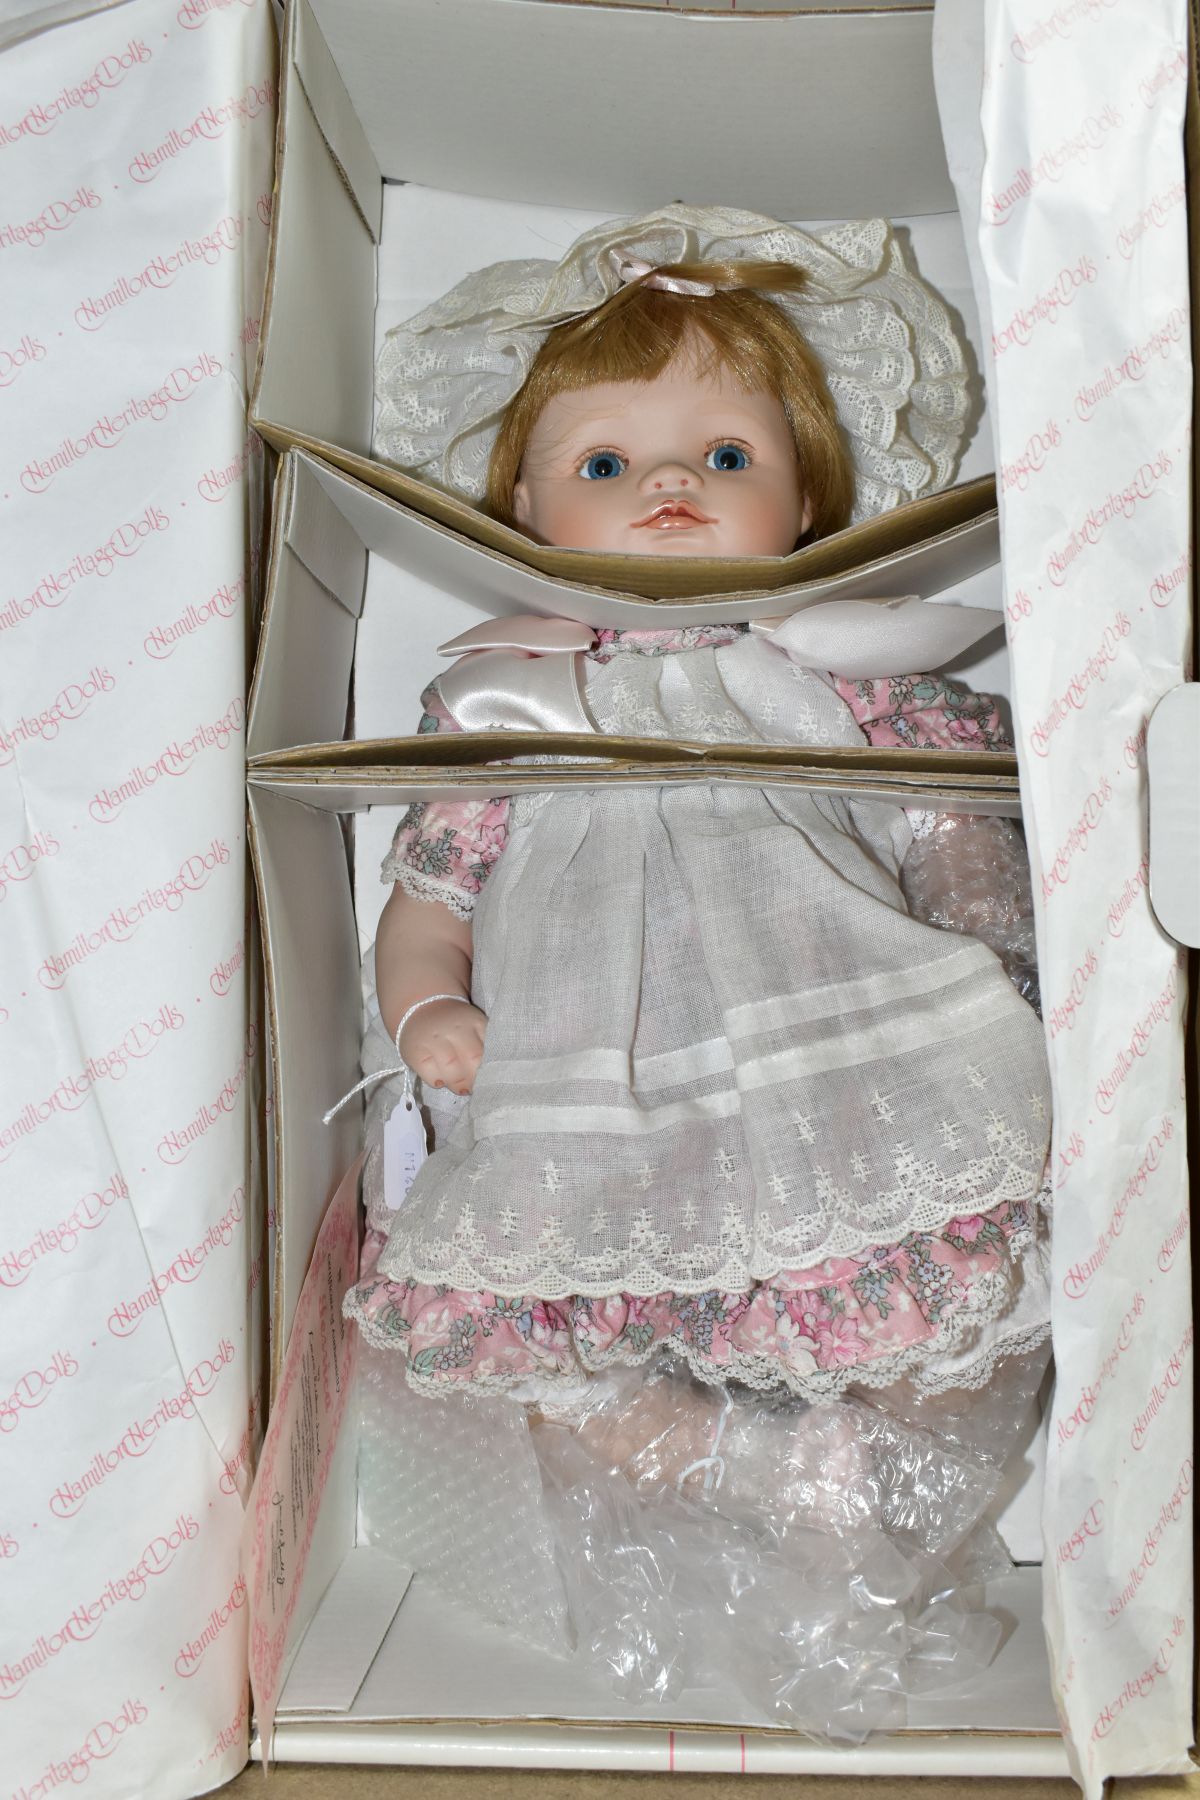 THREE BOXED HAMILTON HERITAGE DOLLS, by Connie Walser Derek, bisque porcelain head and limbs, soft - Image 3 of 7